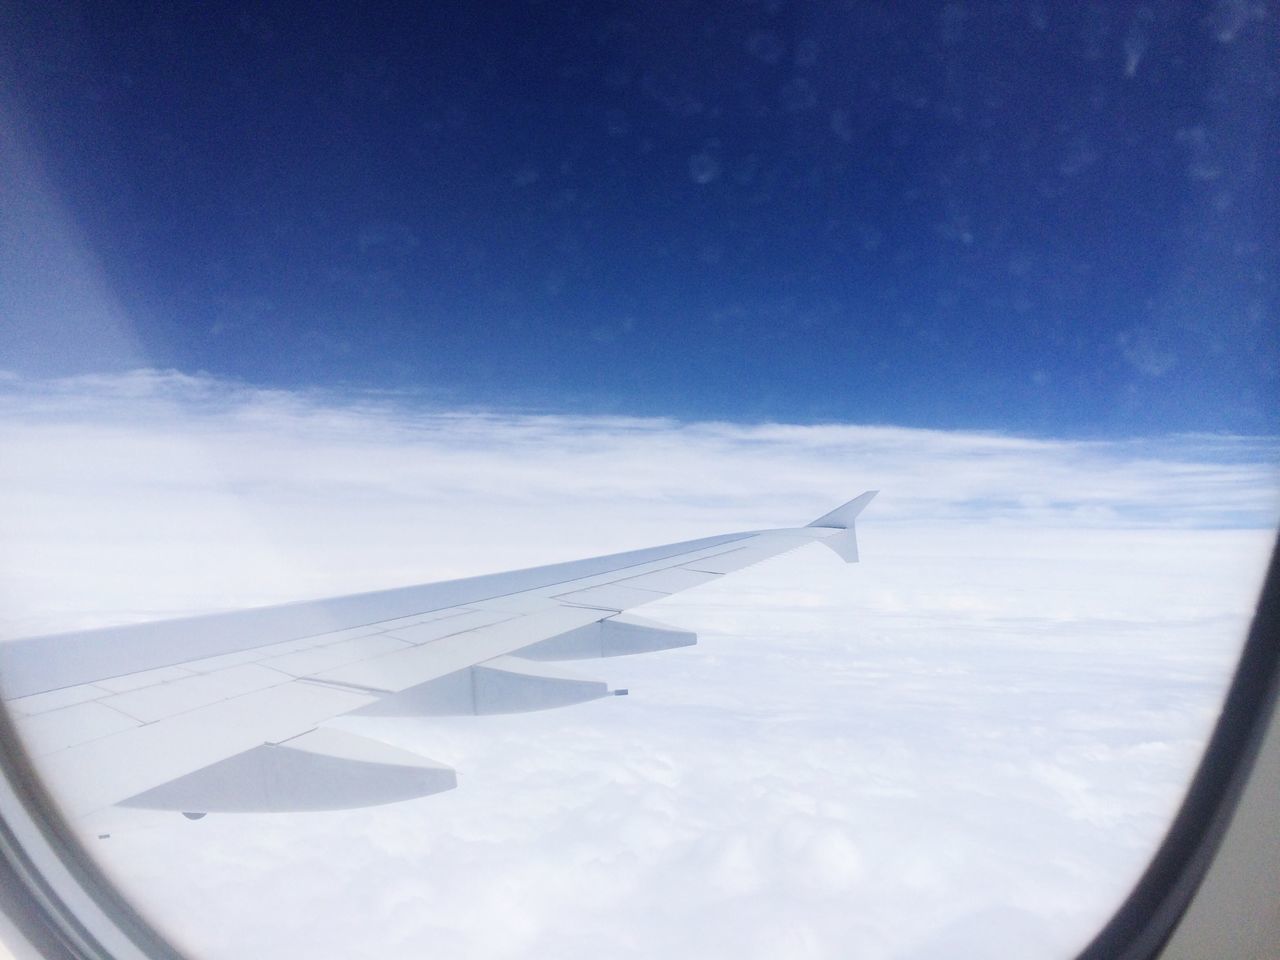 CROPPED IMAGE OF AIRPLANE WING OVER LANDSCAPE